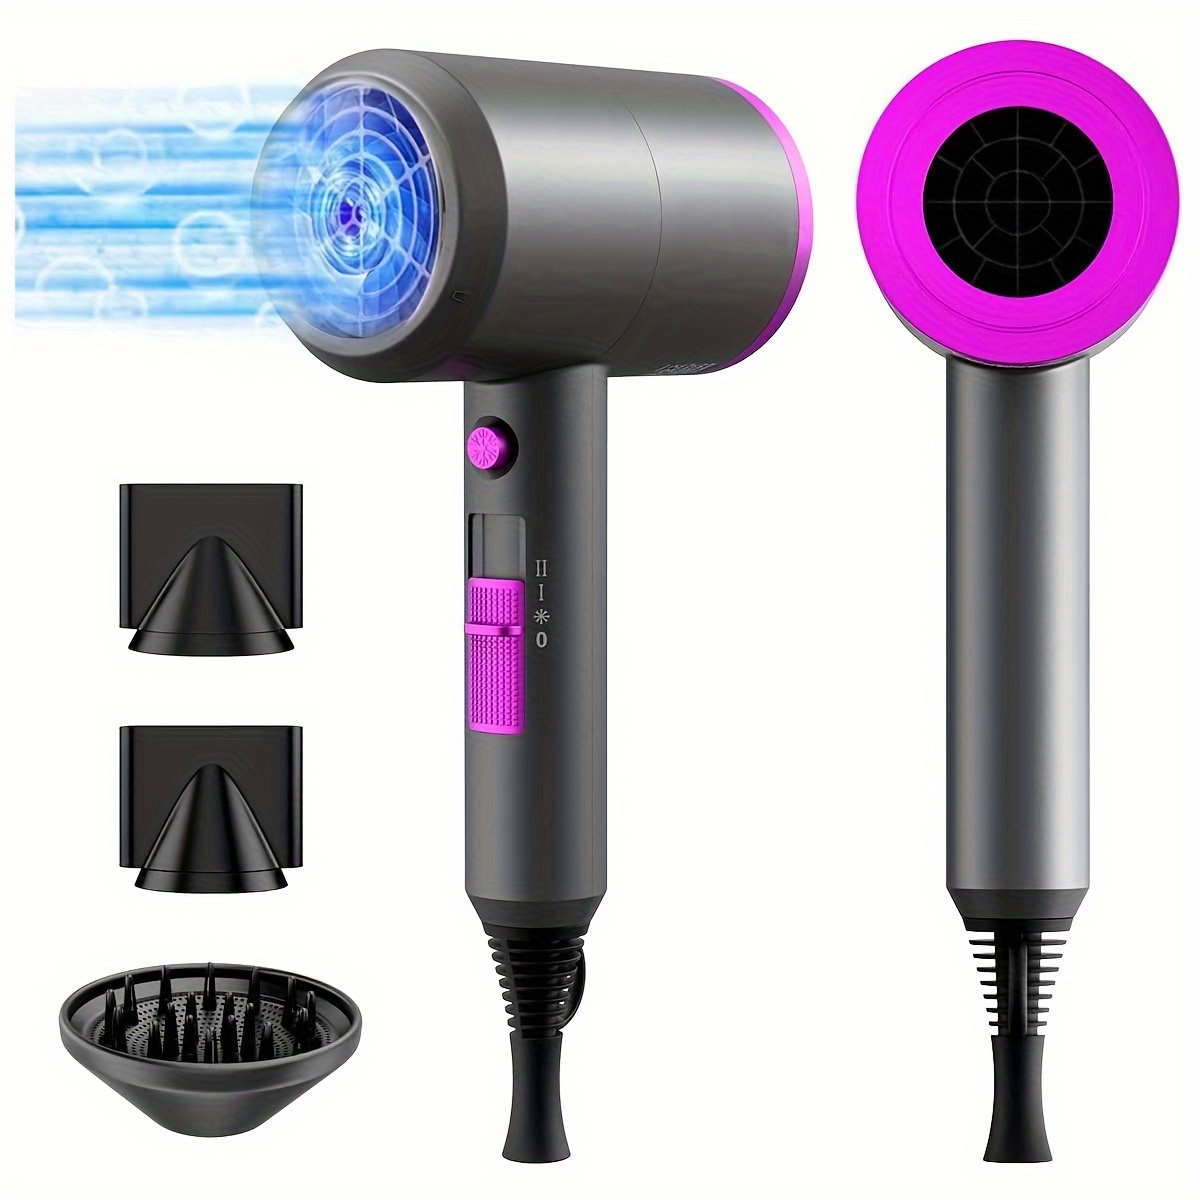 

Powerful 1800w Fast Drying Ionic Hair Dryer With Diffuser And Nozzle- Constant Temperature Protection For Damage-free Hair - Gifts For Men Women Home Travel